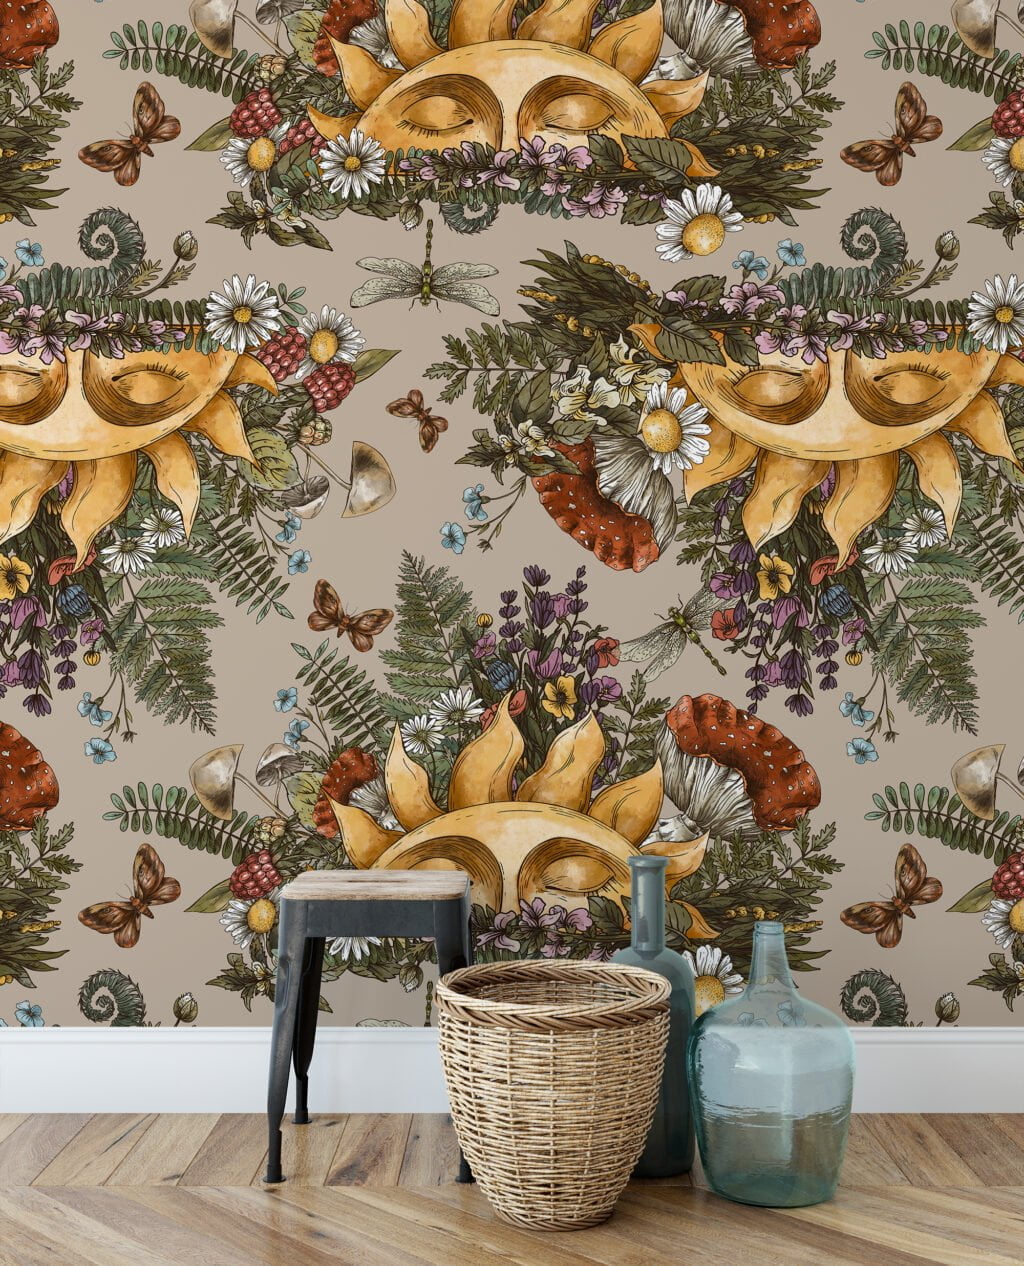 Floral Mystic Sun Illustration With Butterflies And Dragonflies Wallpaper, Enchanted Forest Peel & Stick Wall Mural